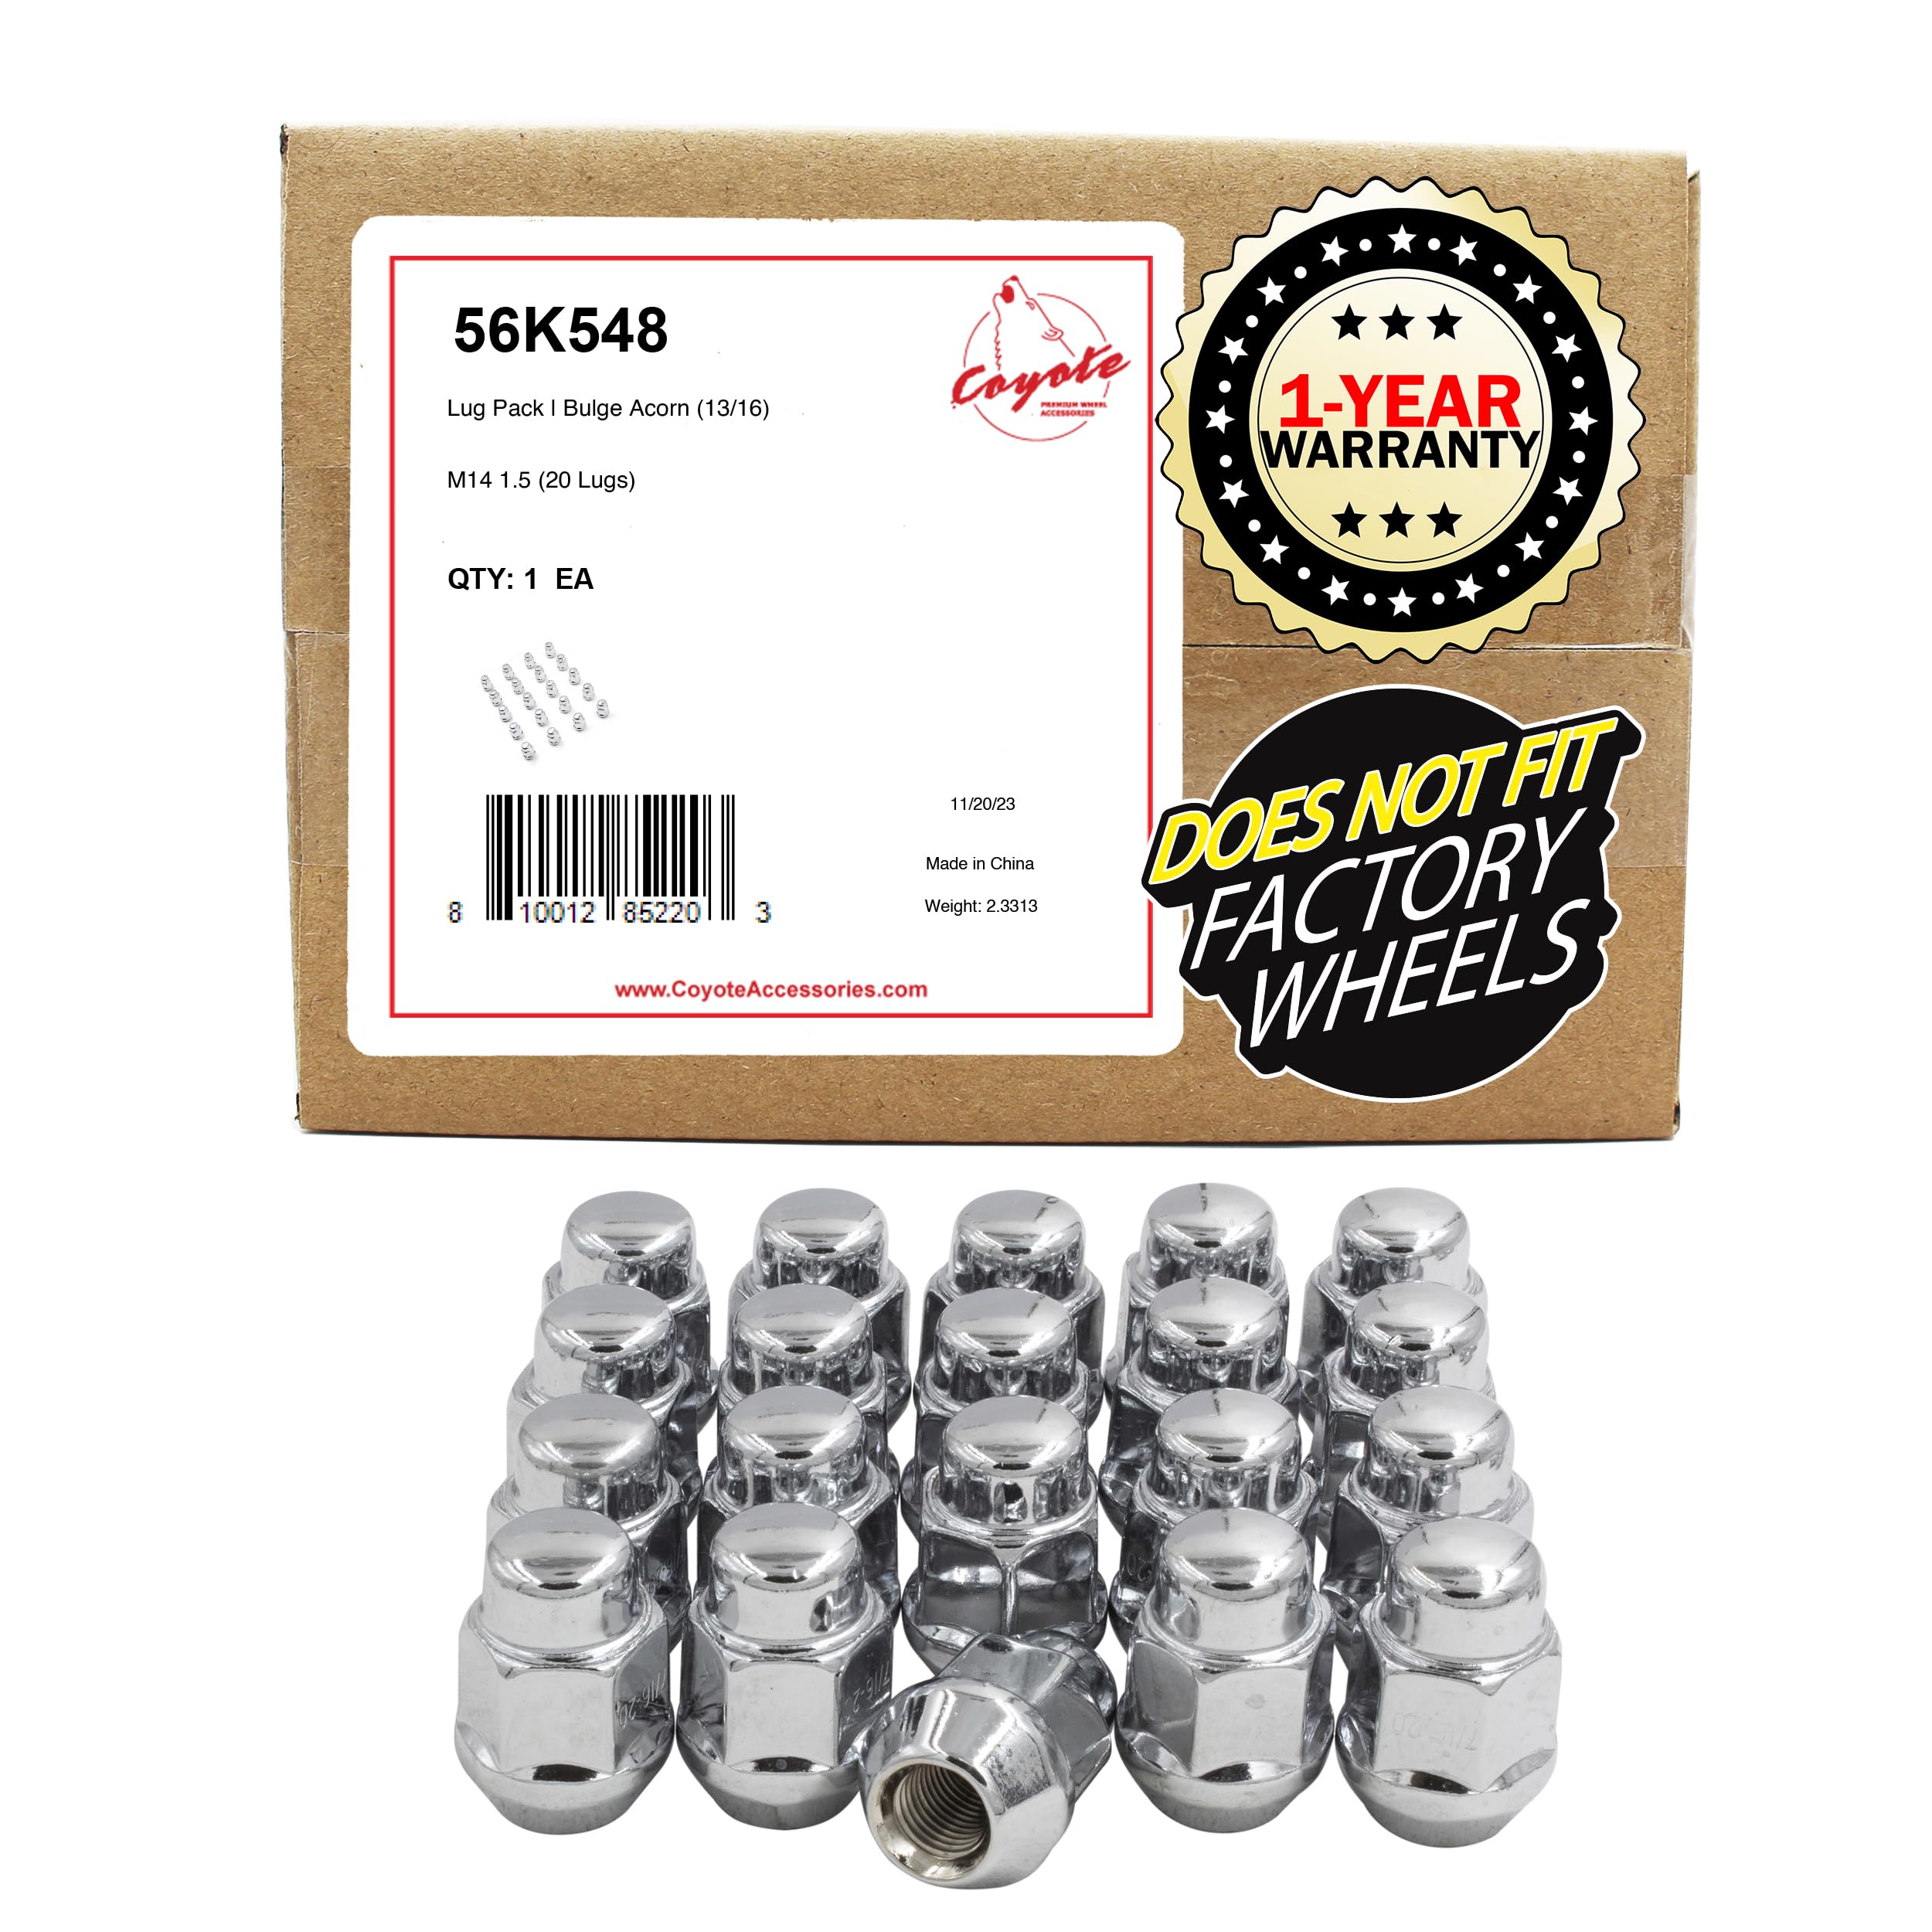 Wheel Accessories Parts 20 Pcs M14x1.5 14x1.5 Thread Bulge Acorn 35mm 1.38" Long Lug Nuts Chrome 13/16" 21mm Hex Fits 2010+ Chevy Camaro | Dodge Charger Challenger | 2014+ Ford Mustang